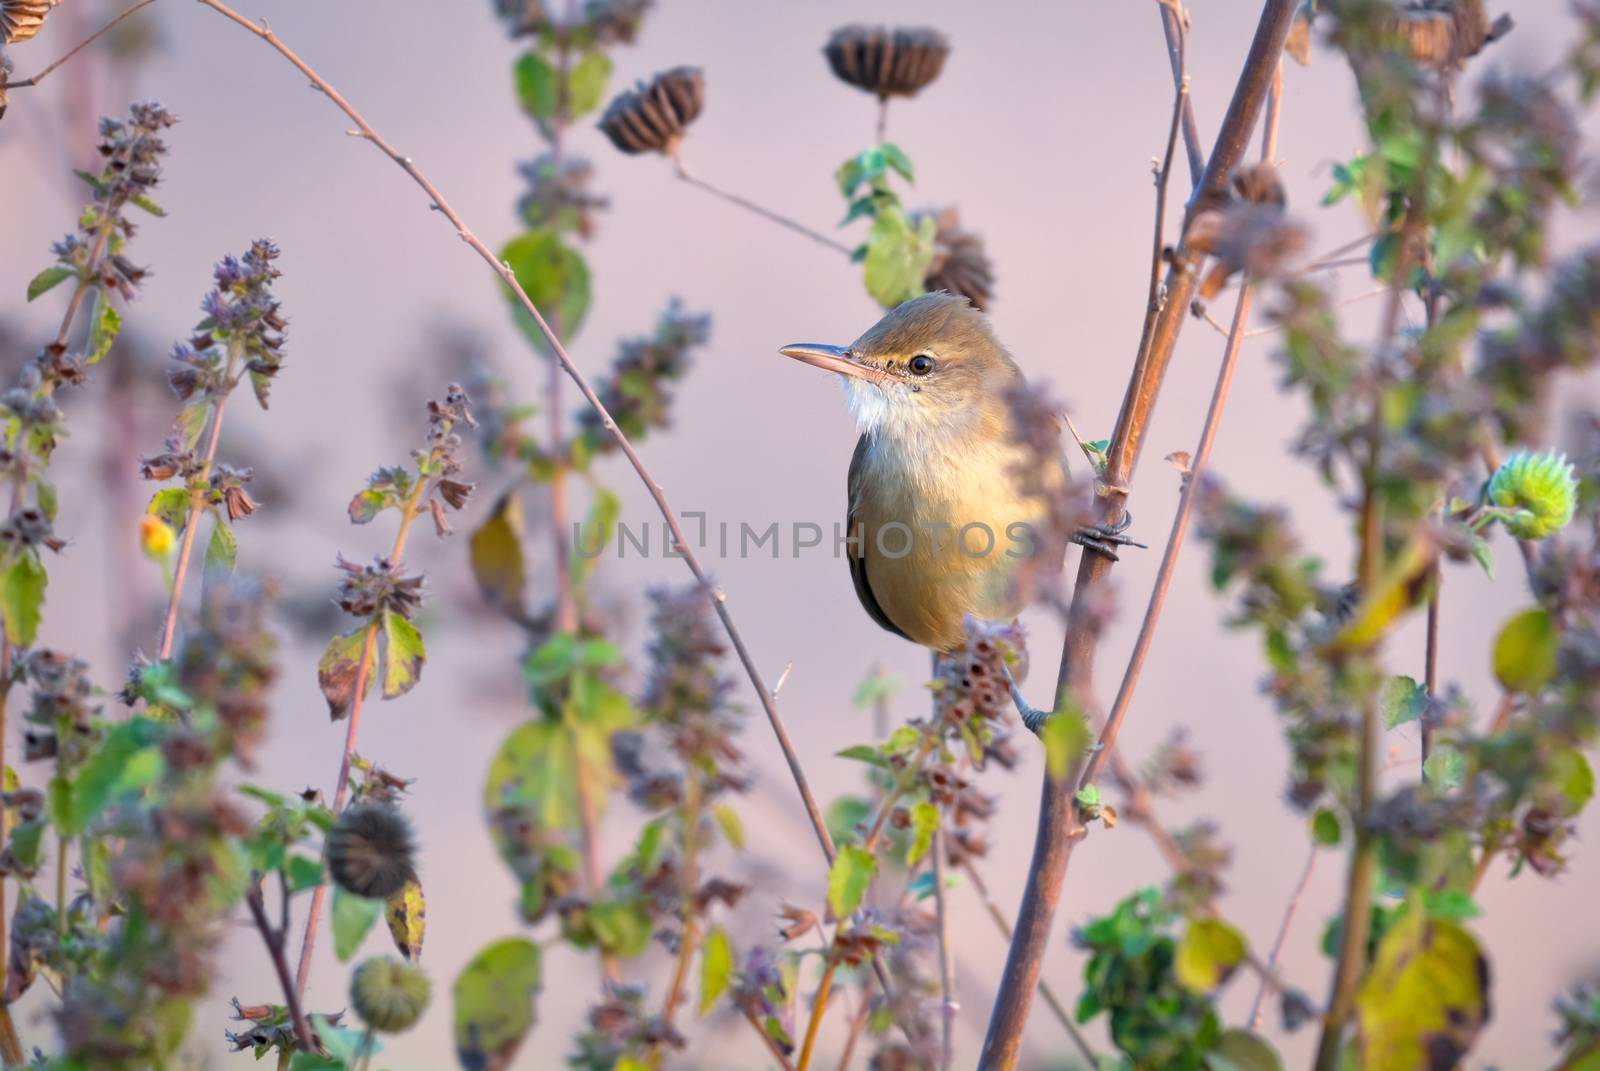 The clamorous reed warbler is an Old World warbler in the genus Acrocephalus. It breeds from Egypt eastwards through Pakistan, Afghanistan and northernmost India